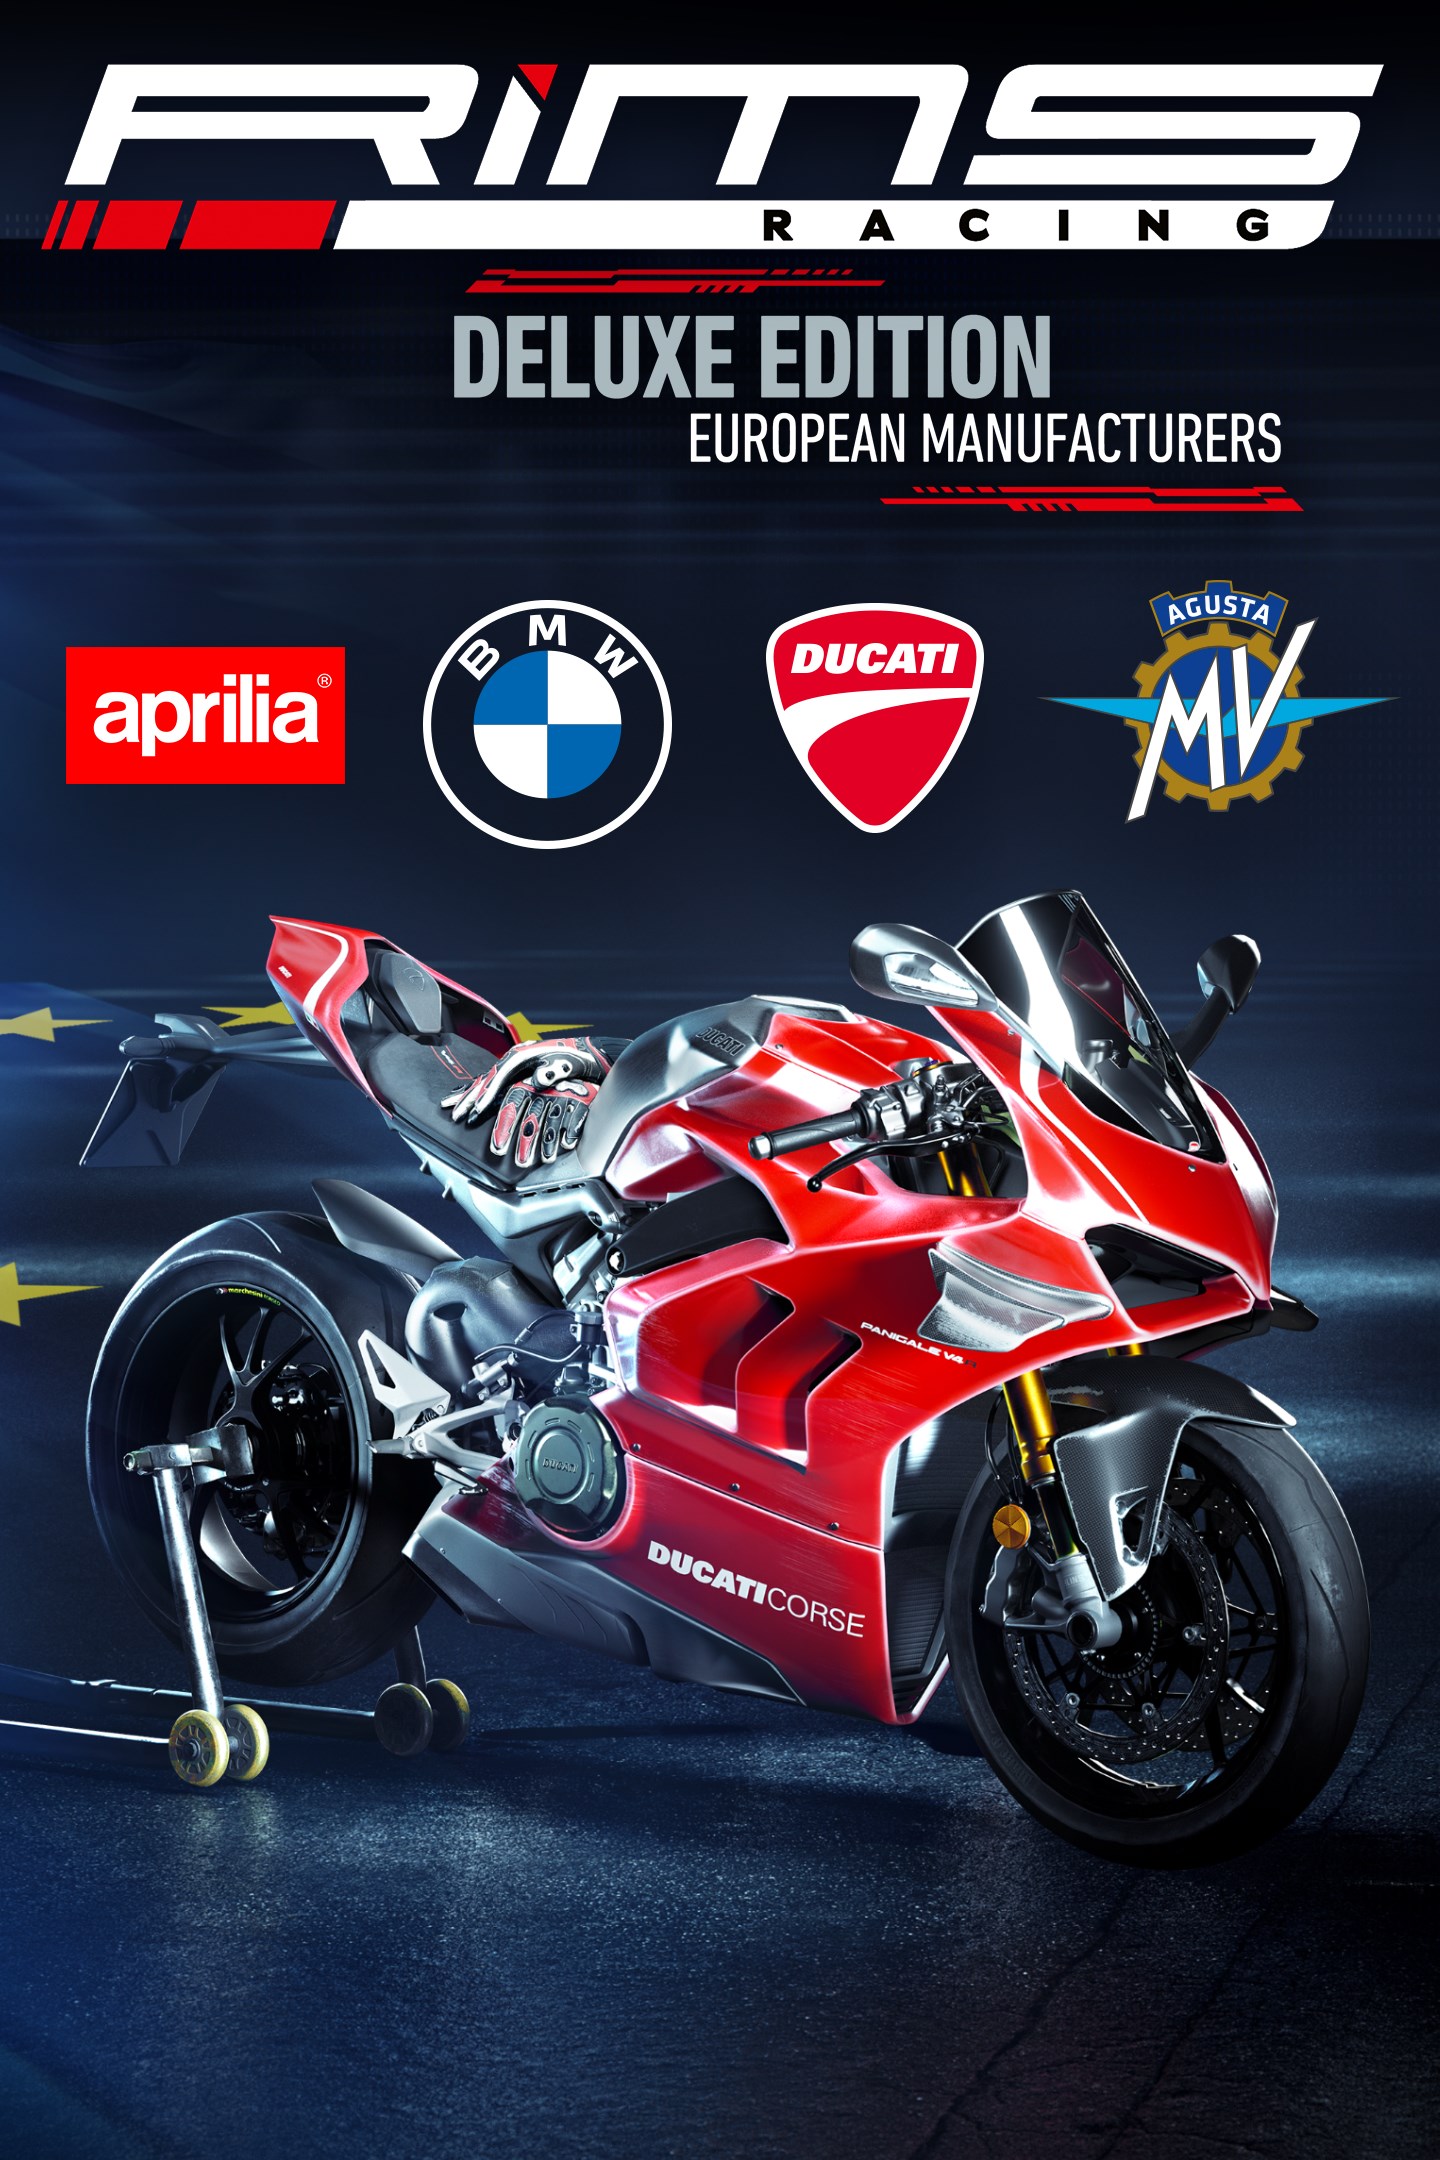 RiMS Racing - European Manufacturers Deluxe Edition Xbox One boxshot